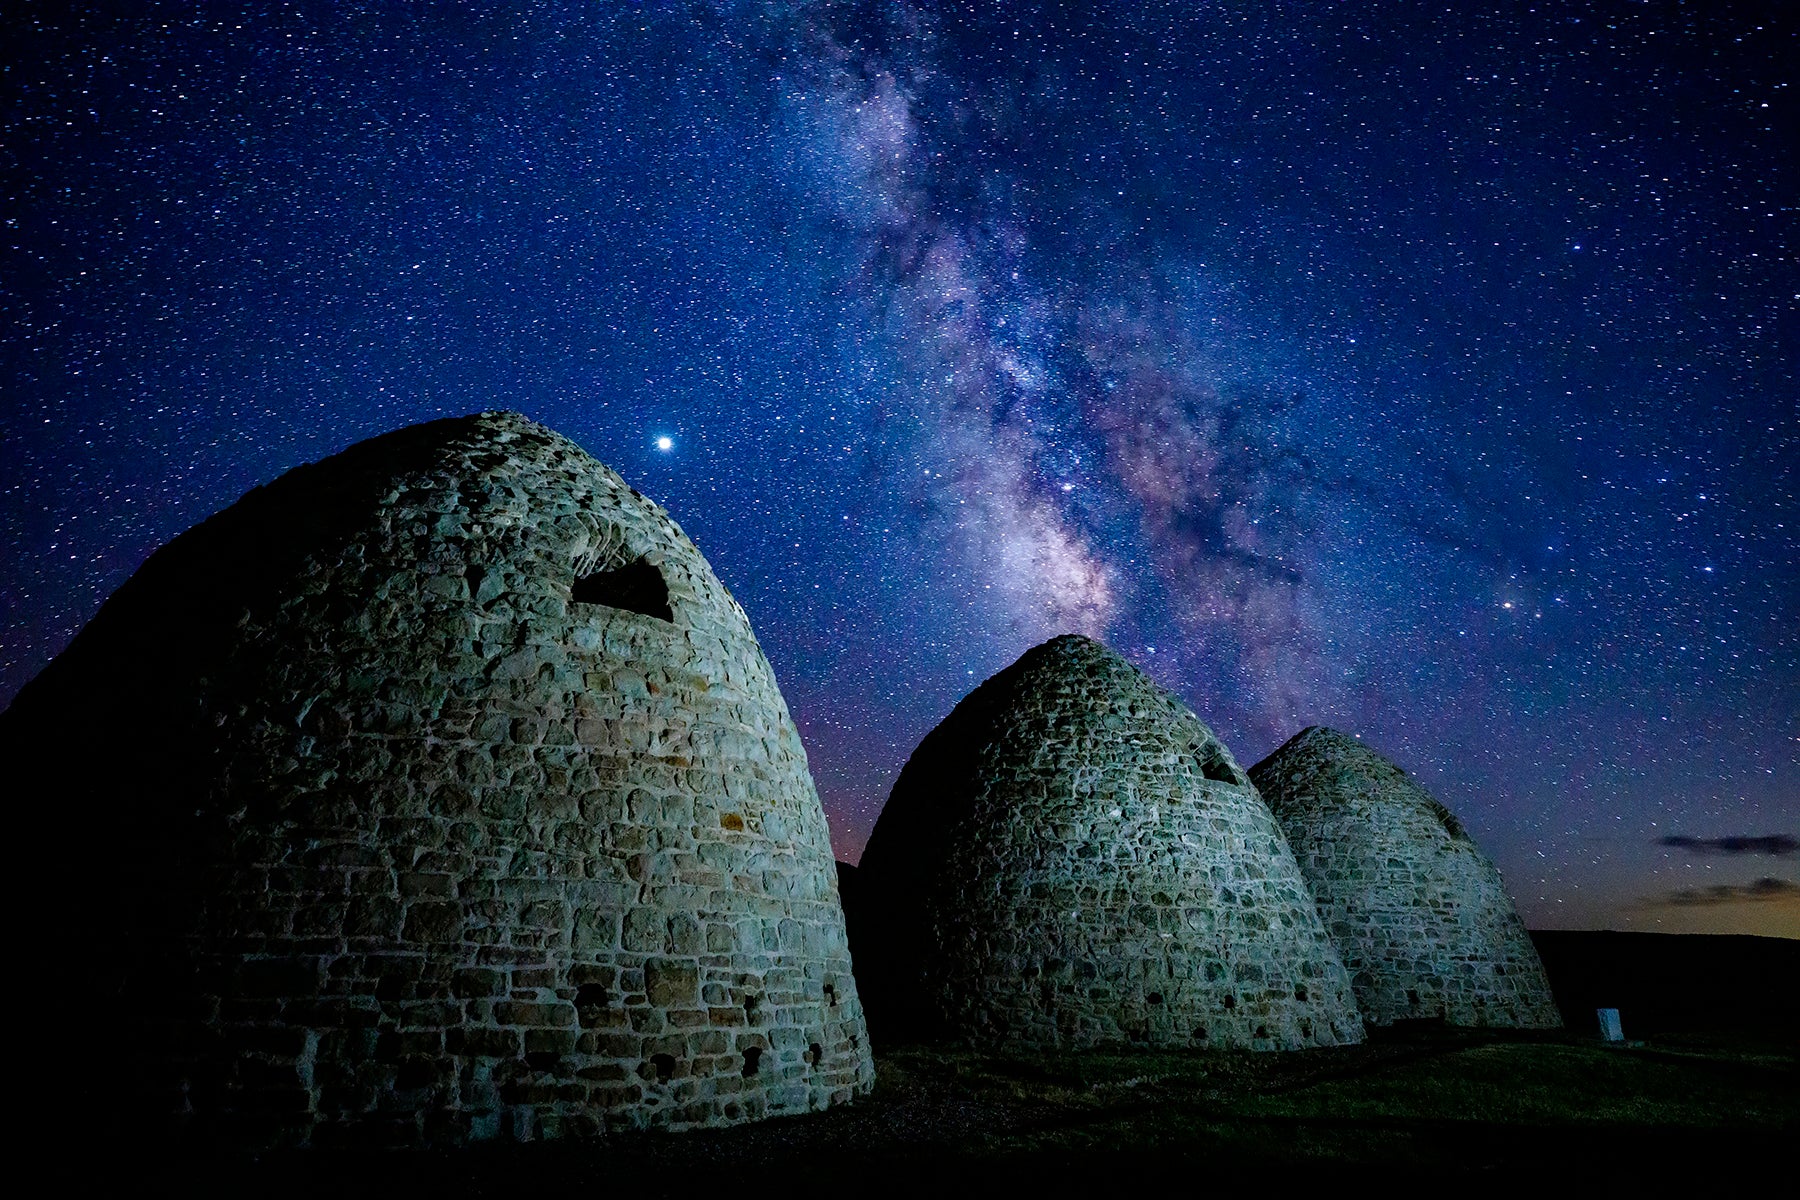 The Milky Way Galaxy fills the night sky above the Piedmont Charcoal Kilns near Evanston Wyoming